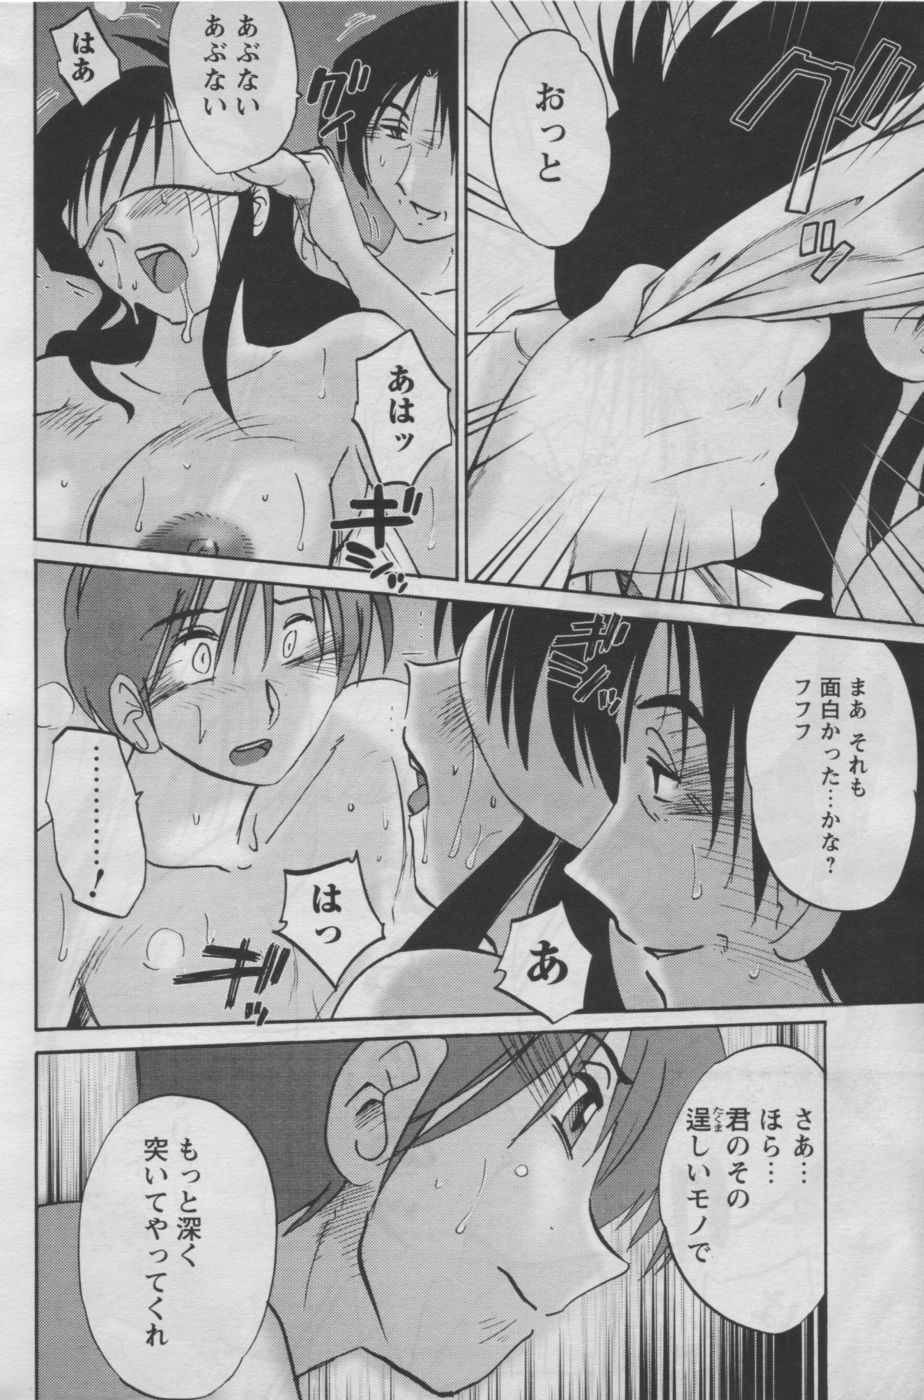 [Anthology] Men's YOUNG 2006-10 page 36 full